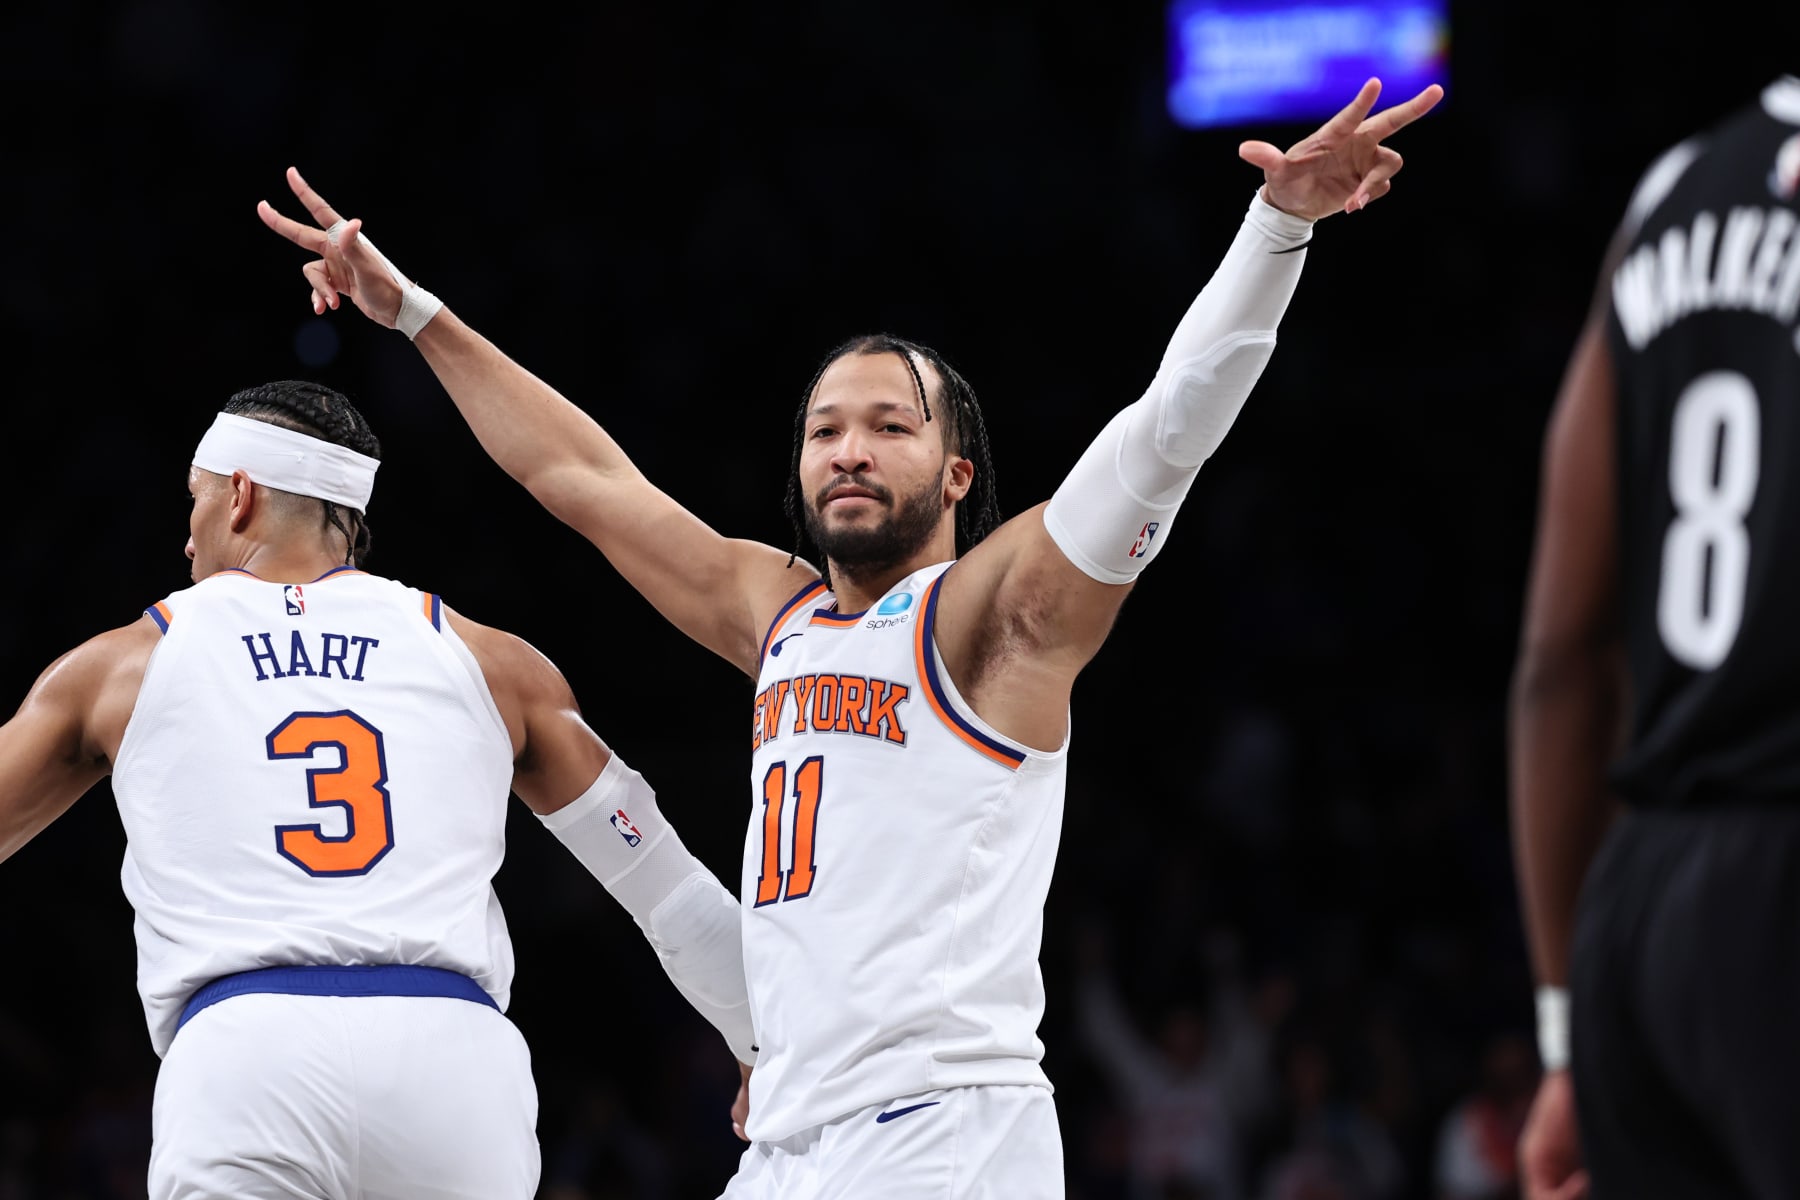 Knicks News, Knicks Rumors, Roster, Schedule, Stats and More